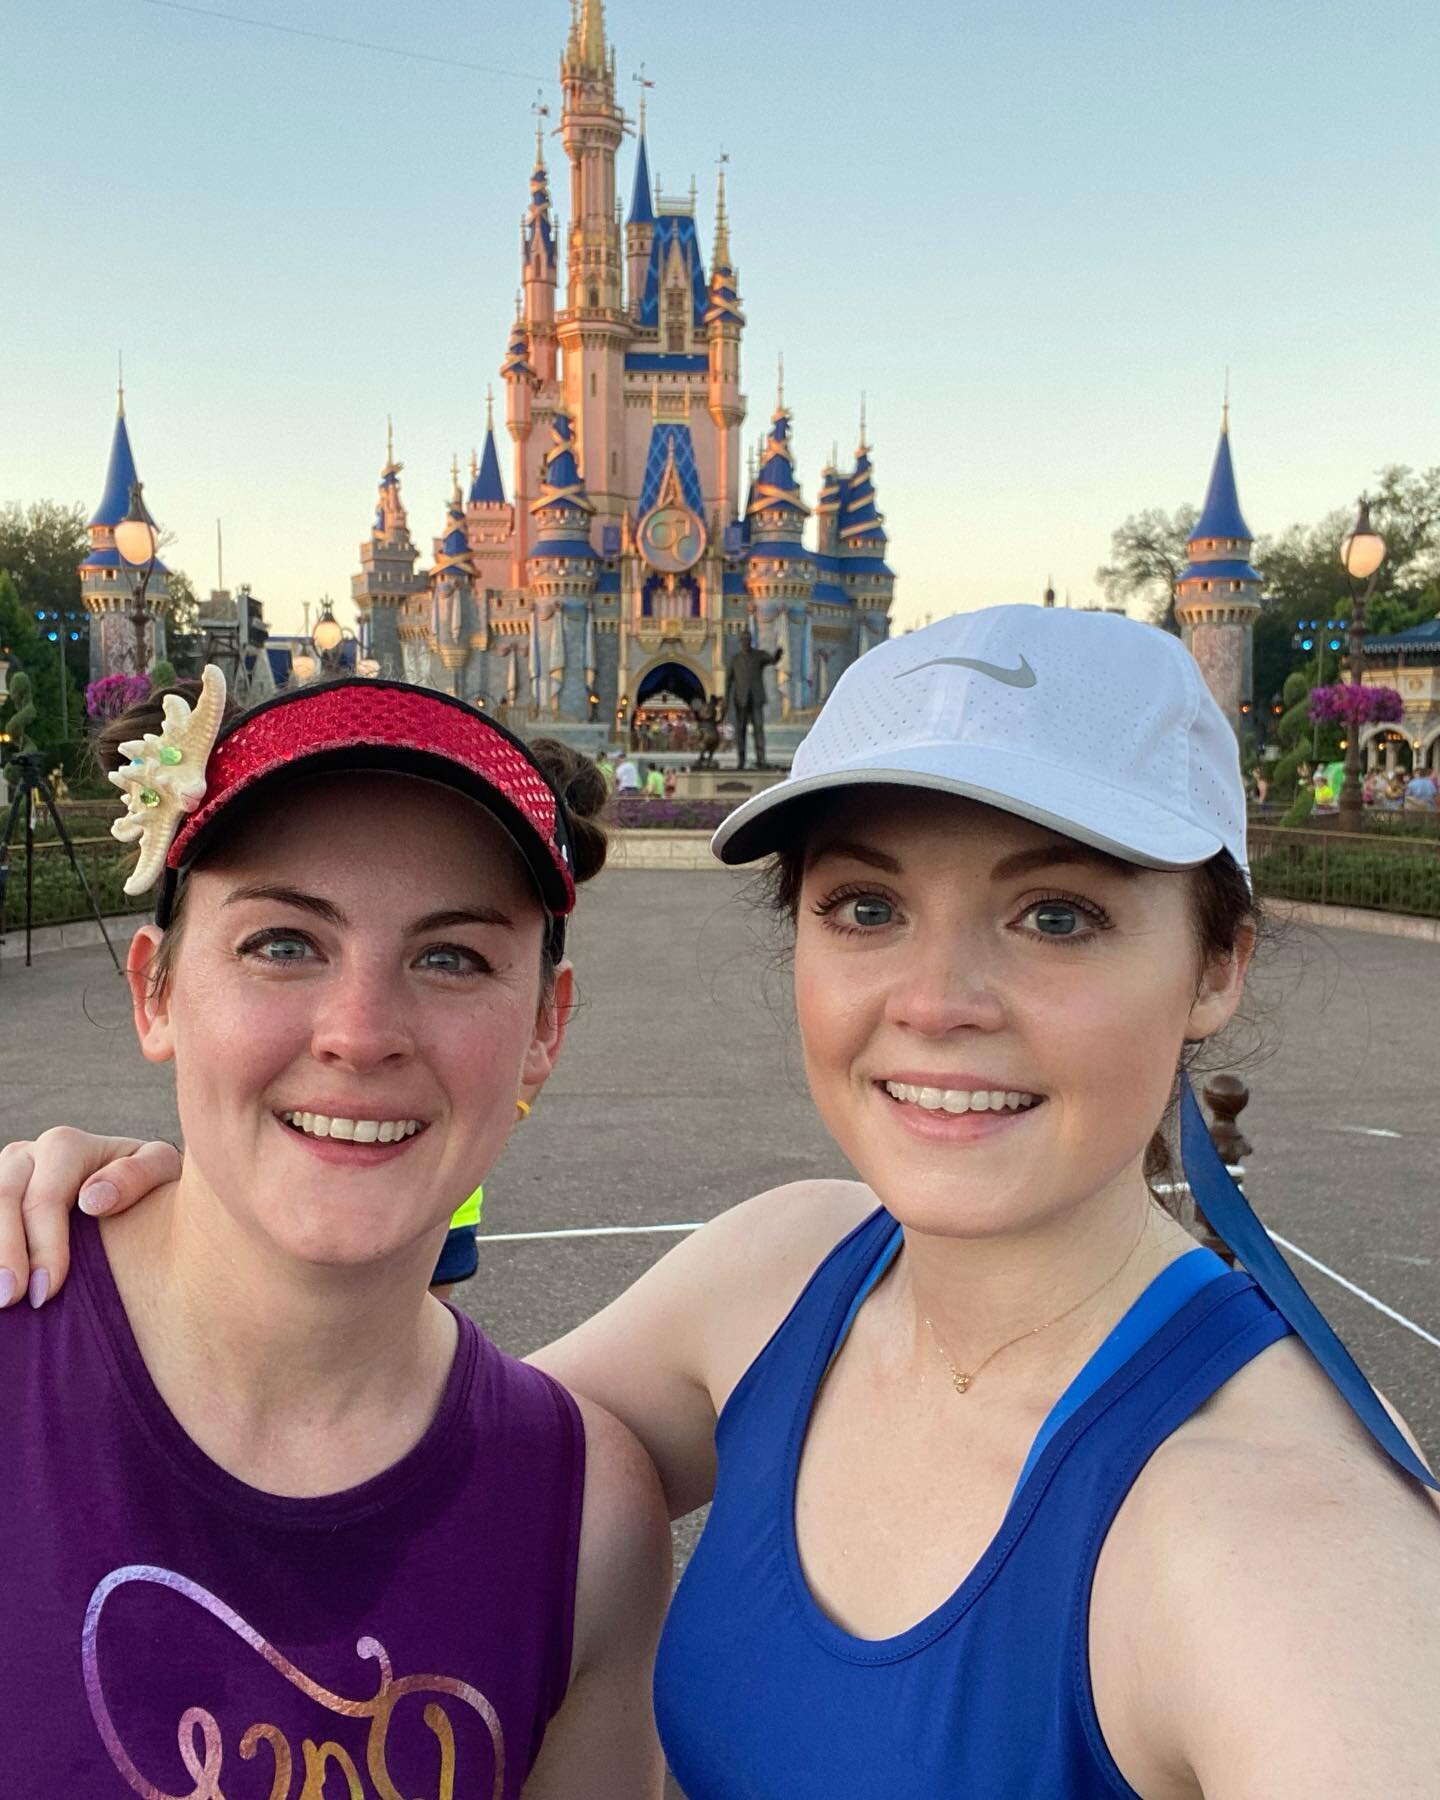 How do you sum up 1.5 weeks where you ran through a castle, braved a dragon, sipped at an alien space bar, watched fireworks with your prince, and went on a safari with your family? Too many amazing memories made on this trip!!